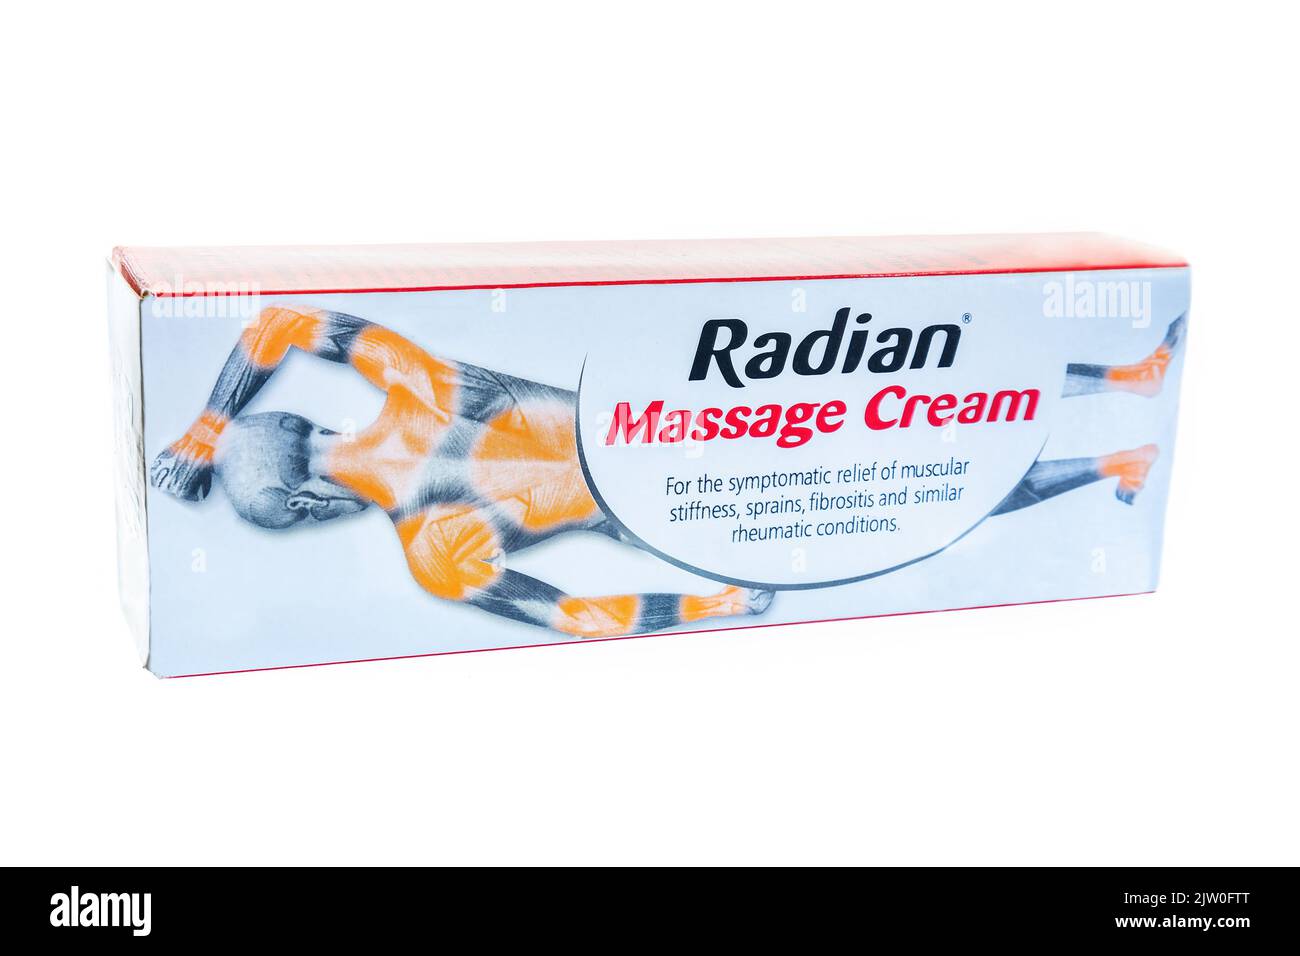 Huelva, Spain - September 2, 2022: Radian Massage Cream is used for Back pain, Pain in muscle strains or sprains, in tendons, Muscle or joint pain, Mu Stock Photo